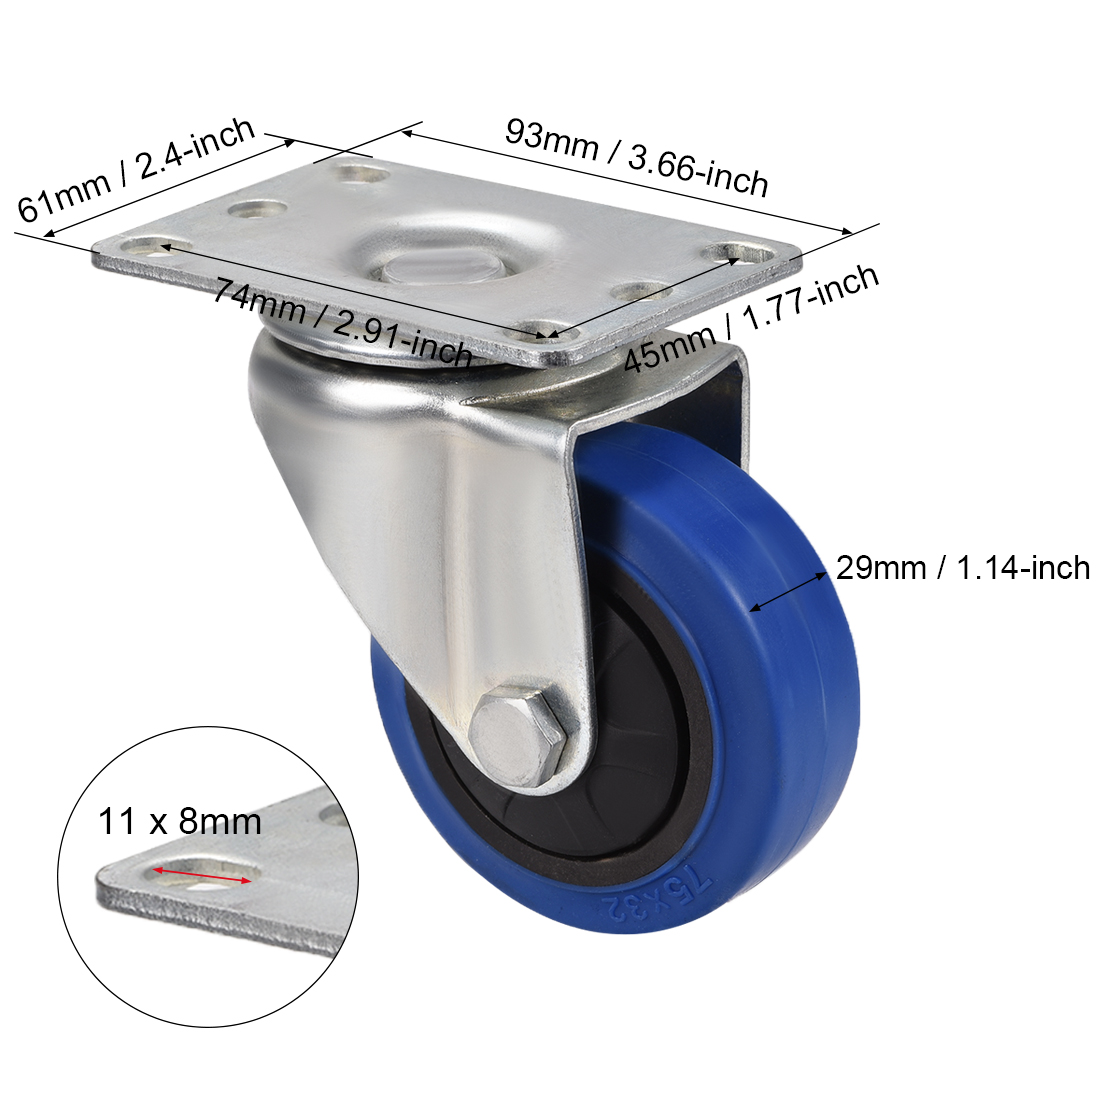 uxcell Swivel Caster Wheels 3 Inch Dia Rubber Caster Top Plate Blue Wheel 132lb Capacity